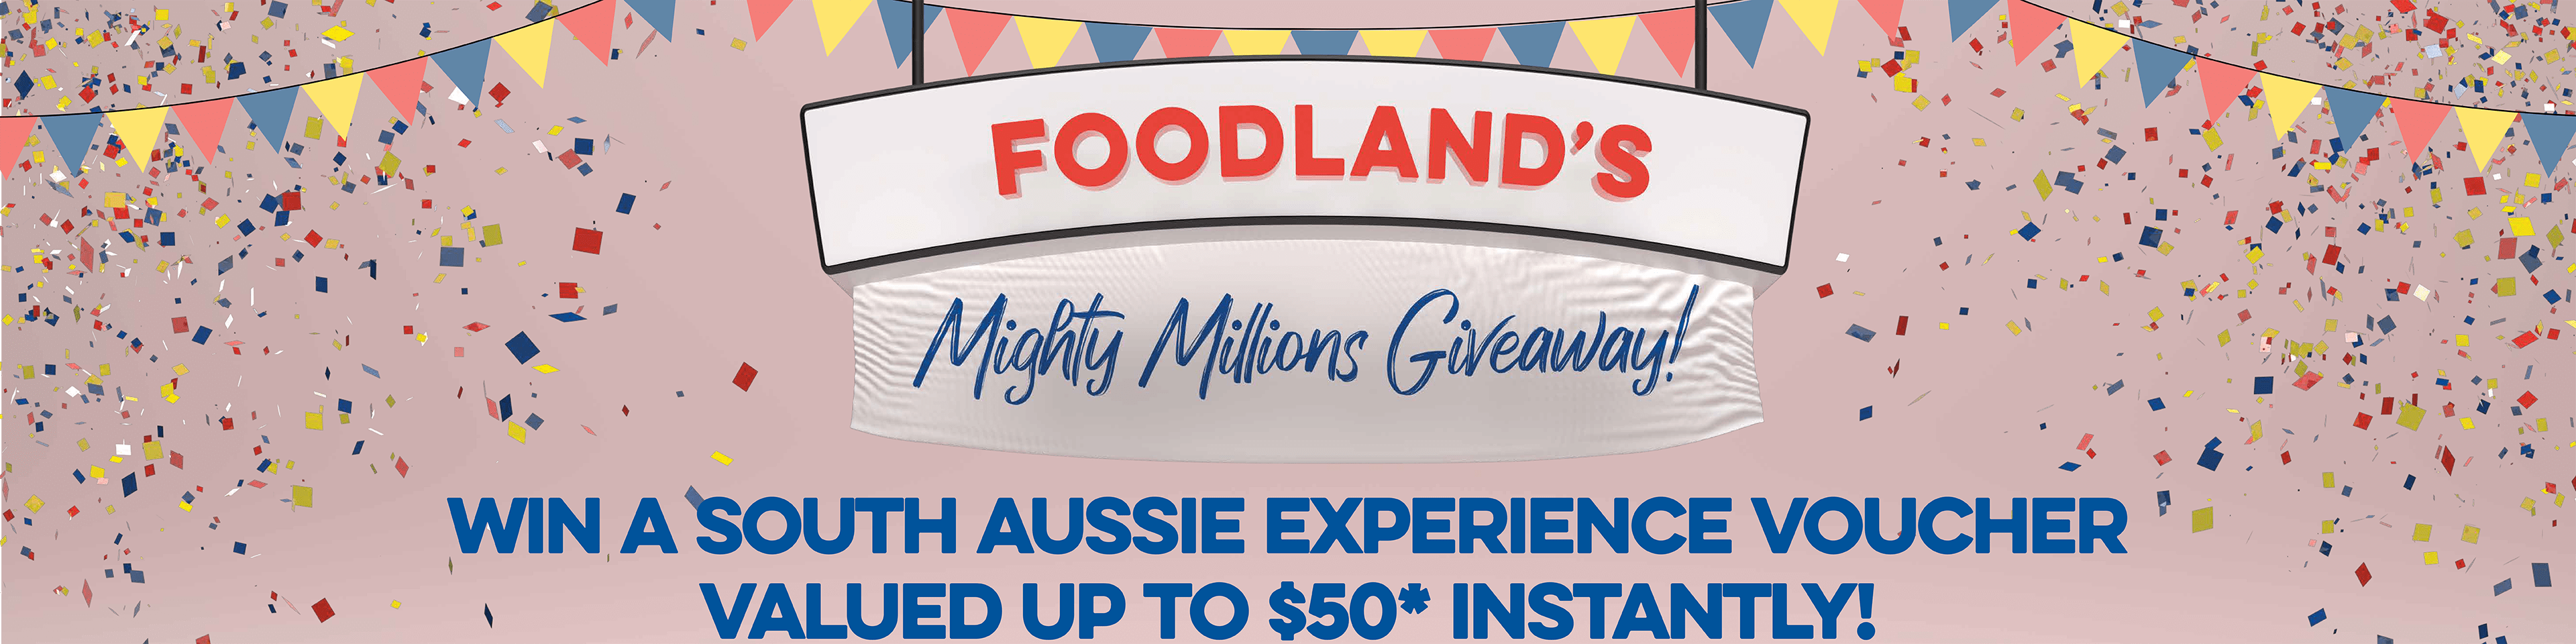 Foodland's Mighty Millions Giveaway Promotion